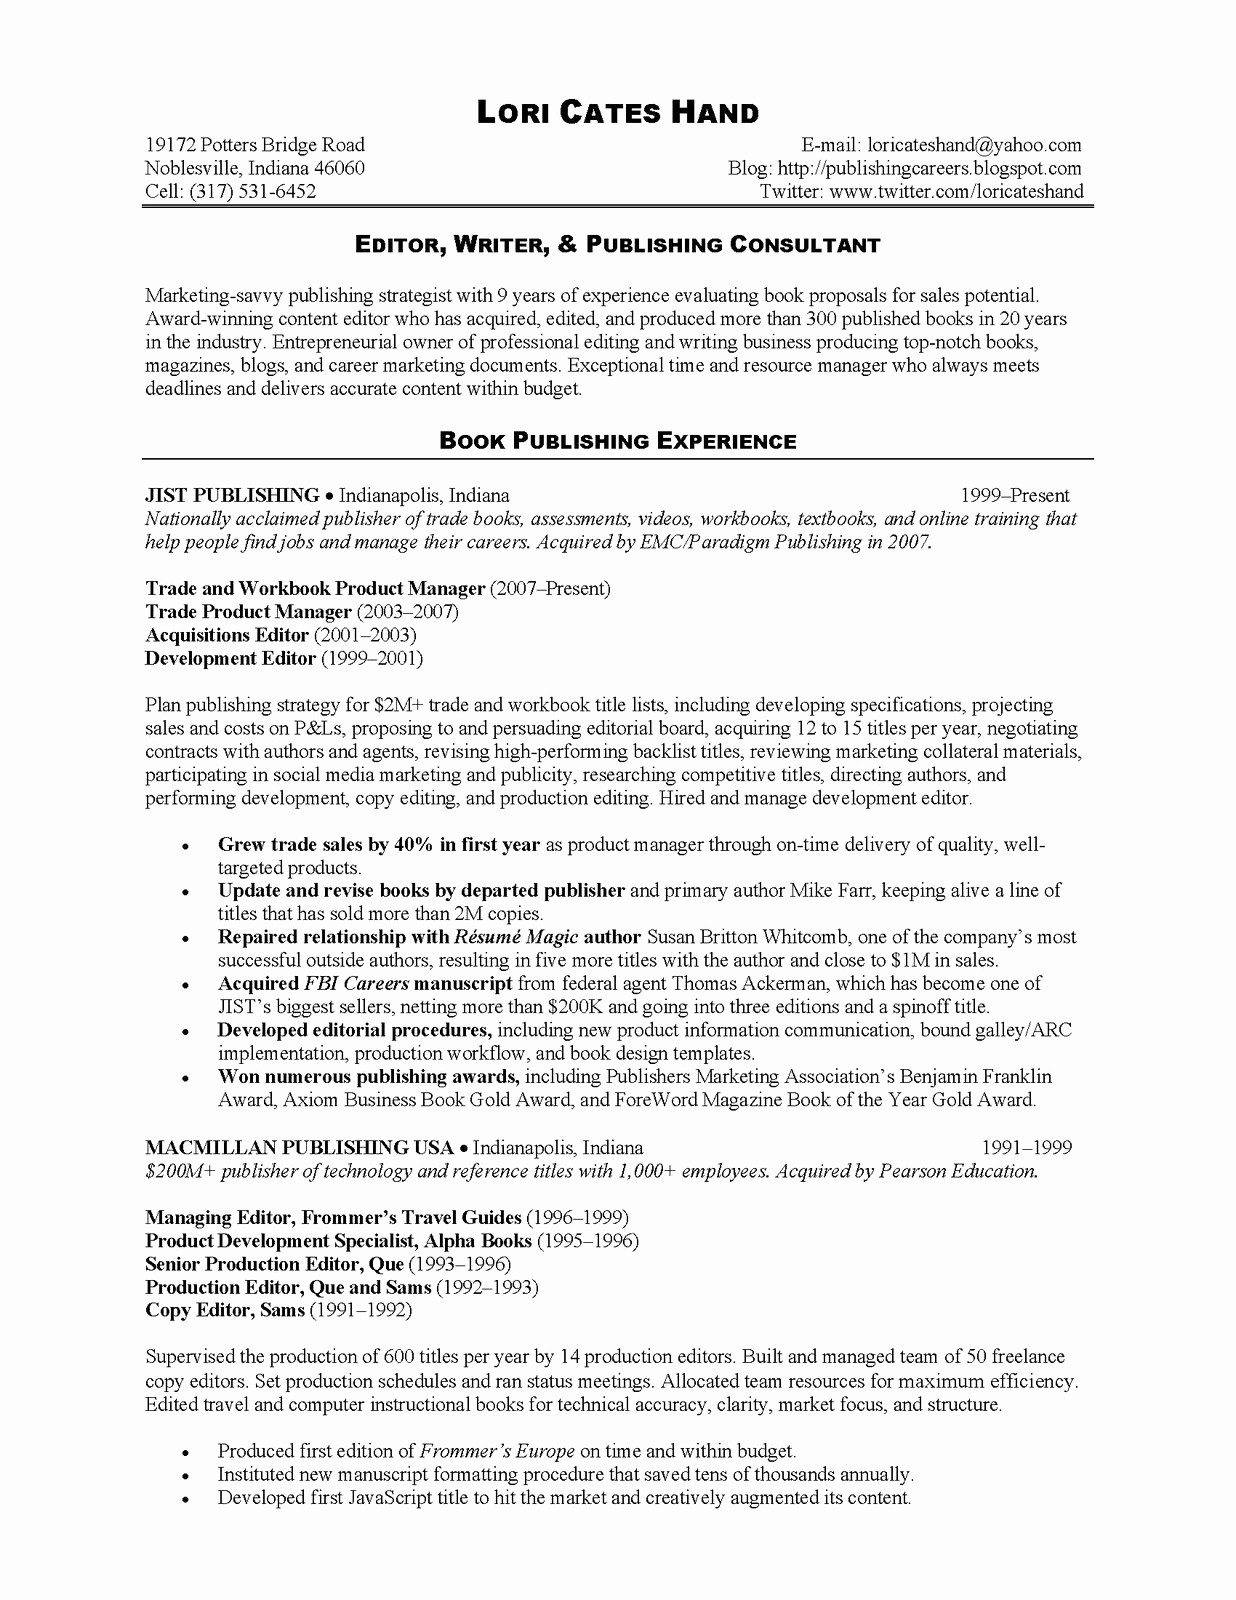 Consultation Letter Template - Business Consulting Agreement Template Fresh Sample Cover Letter for